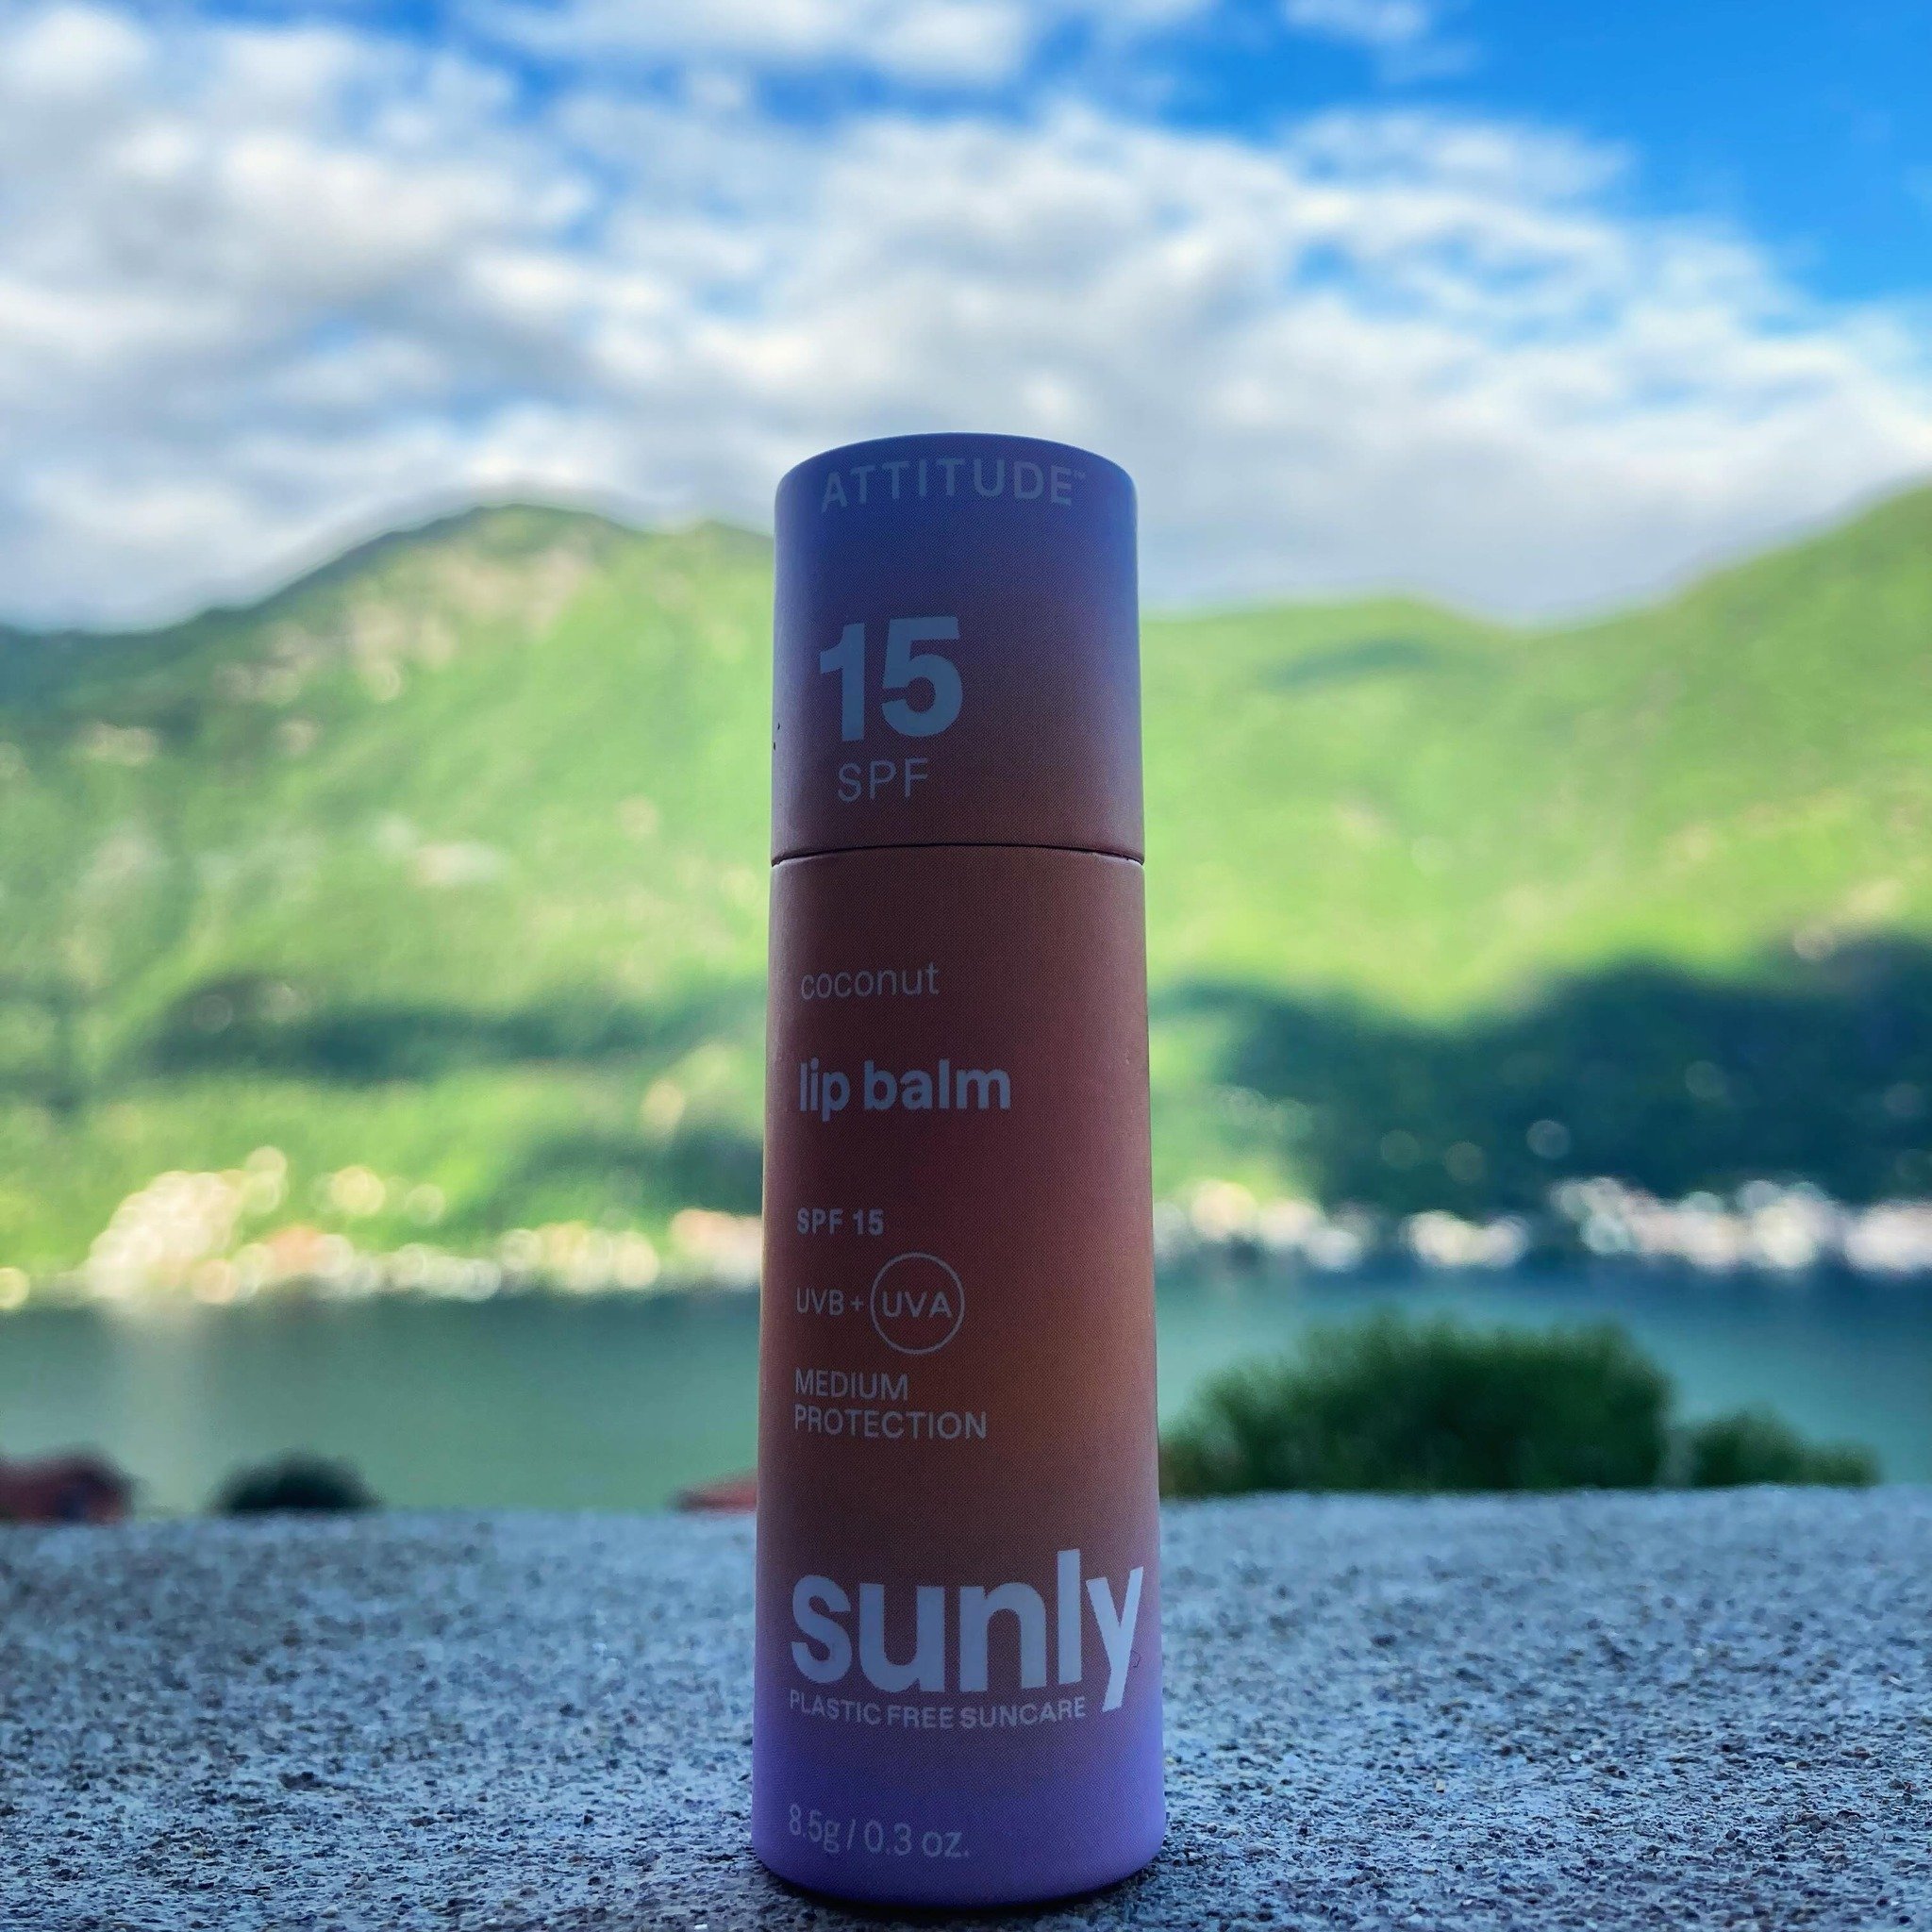 Natural Brands in the wild&hellip; Sun&rsquo;s out; SPF&rsquo;s out 🌤️@attitude_living making it really easy to travel plastic-free &mdash; plus, this Coconut Lip Balm doubles as a lip tint, easing the headache of travelling with #handluggageonly💋
